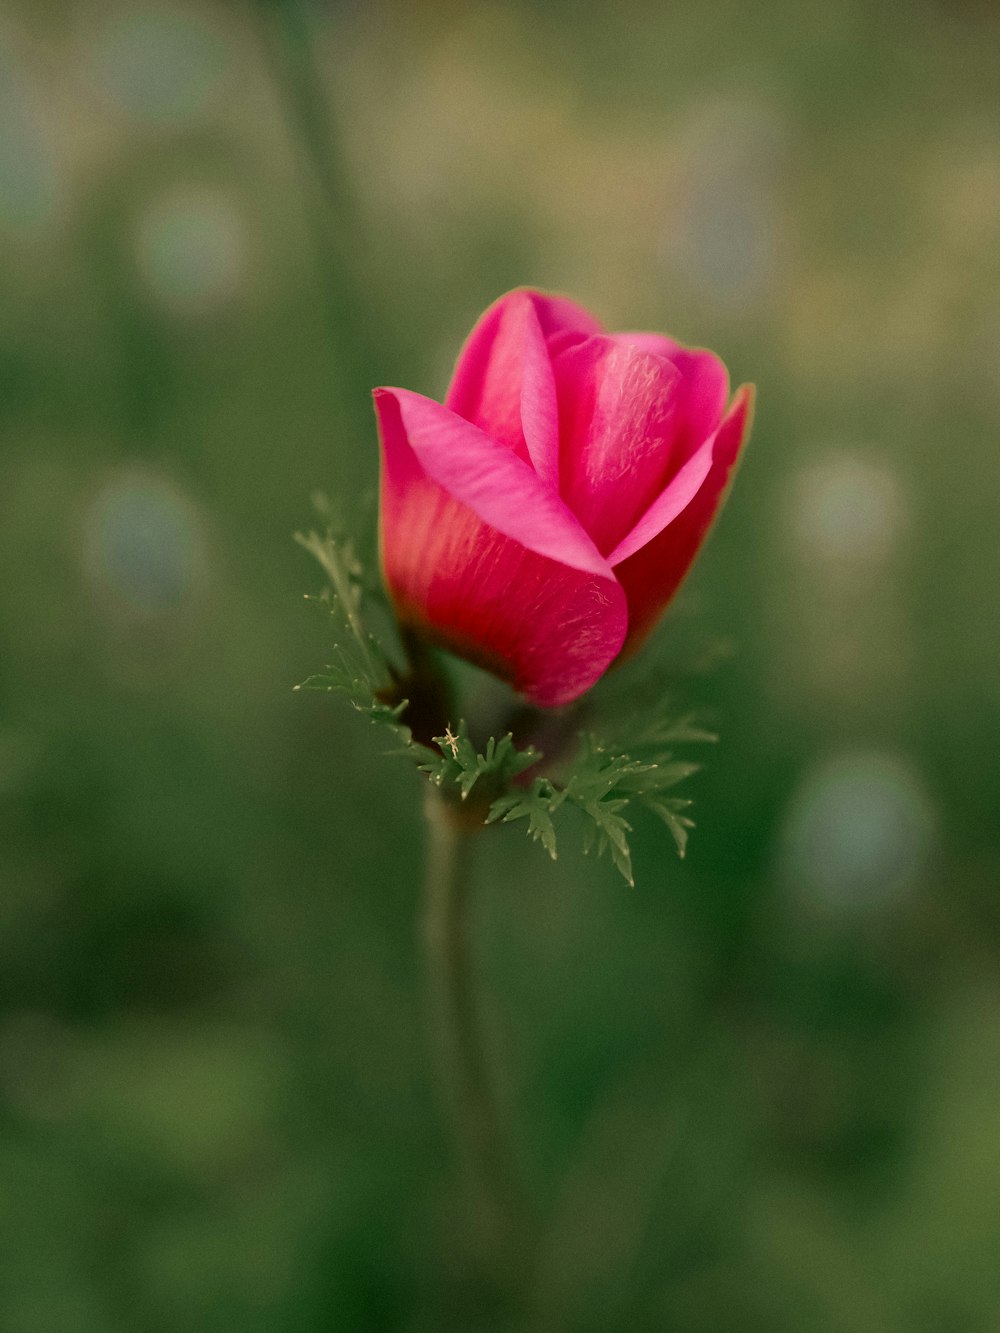 a single pink flower with a blurry background